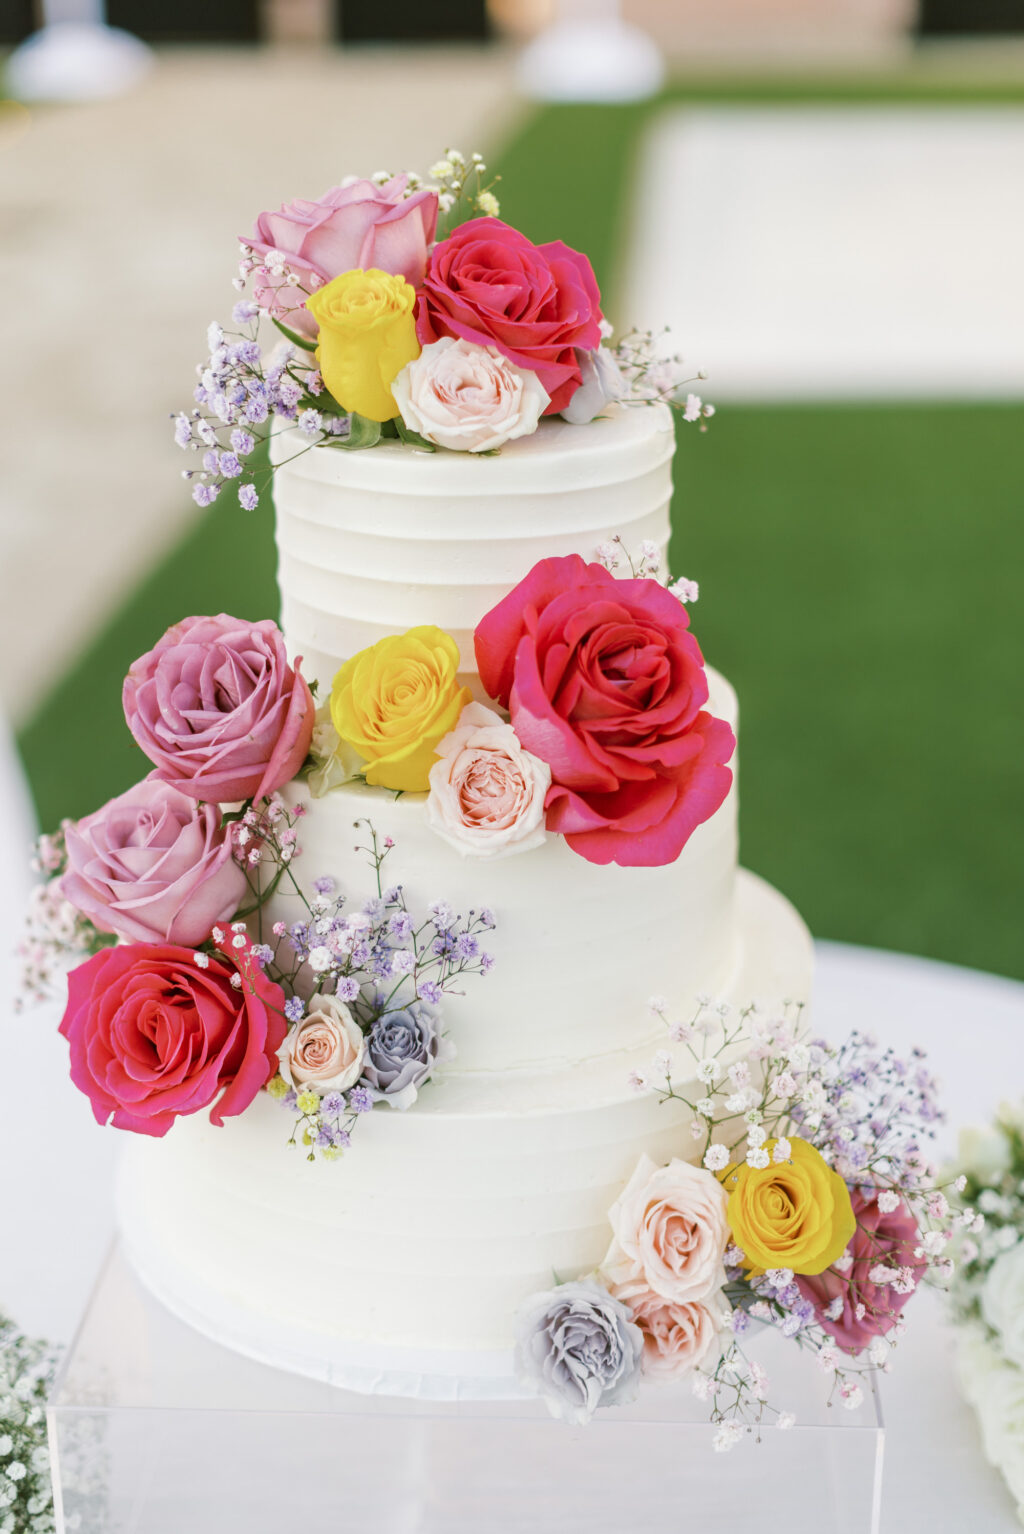 Three Tier Round White Wedding Cake With Fresh Red and Purple Roses and Baby's Breath | St. Pete Cake Baker The Artistic Whisk